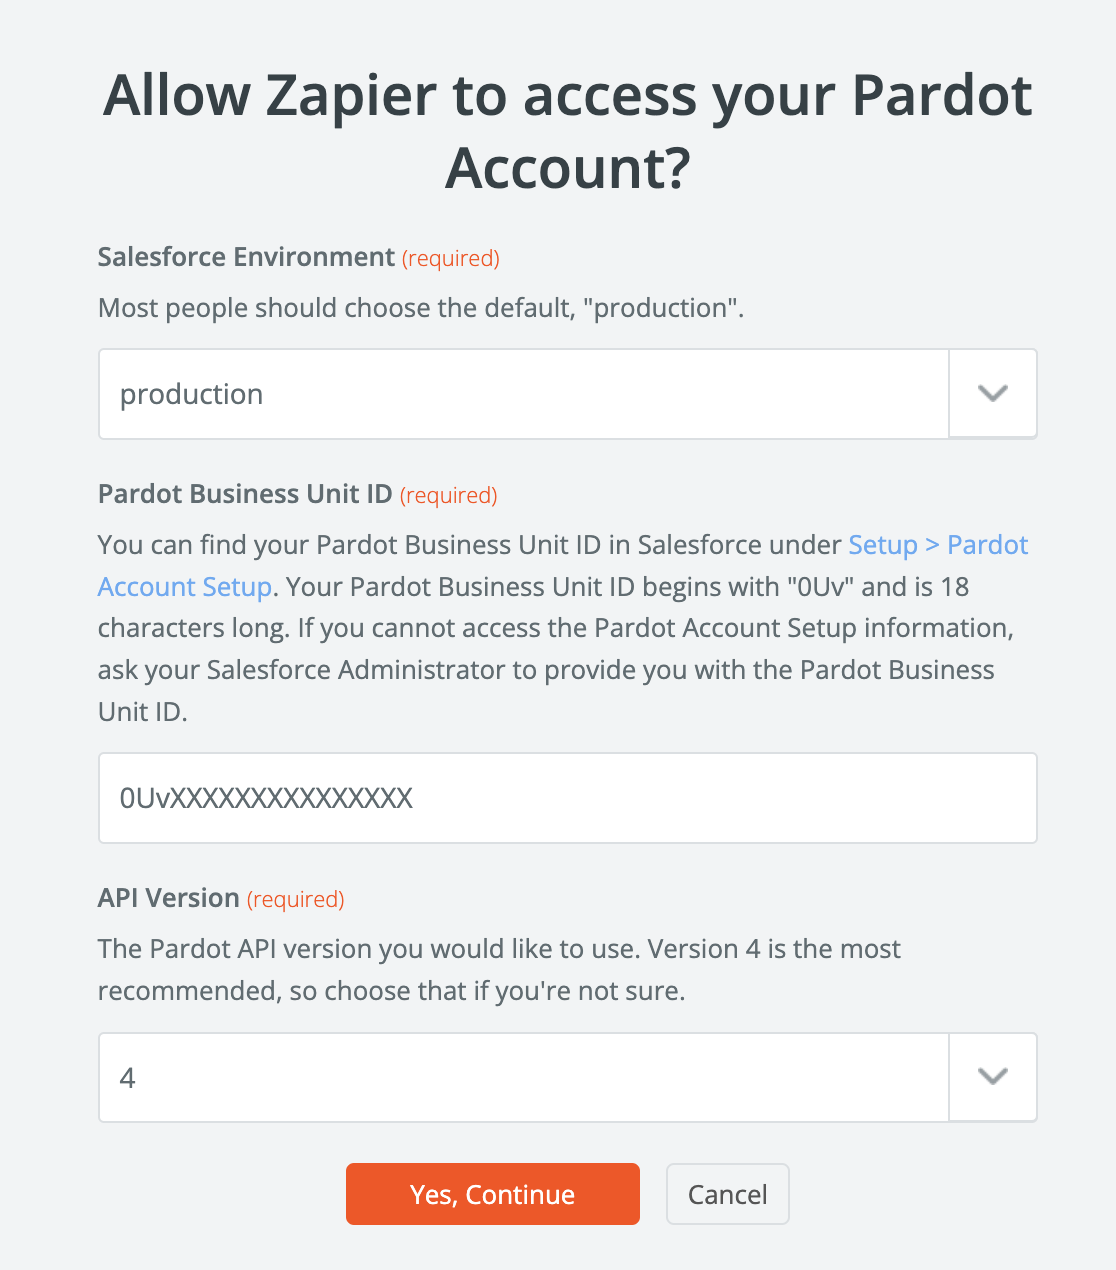 Allowing Zapier to access your Pardot account